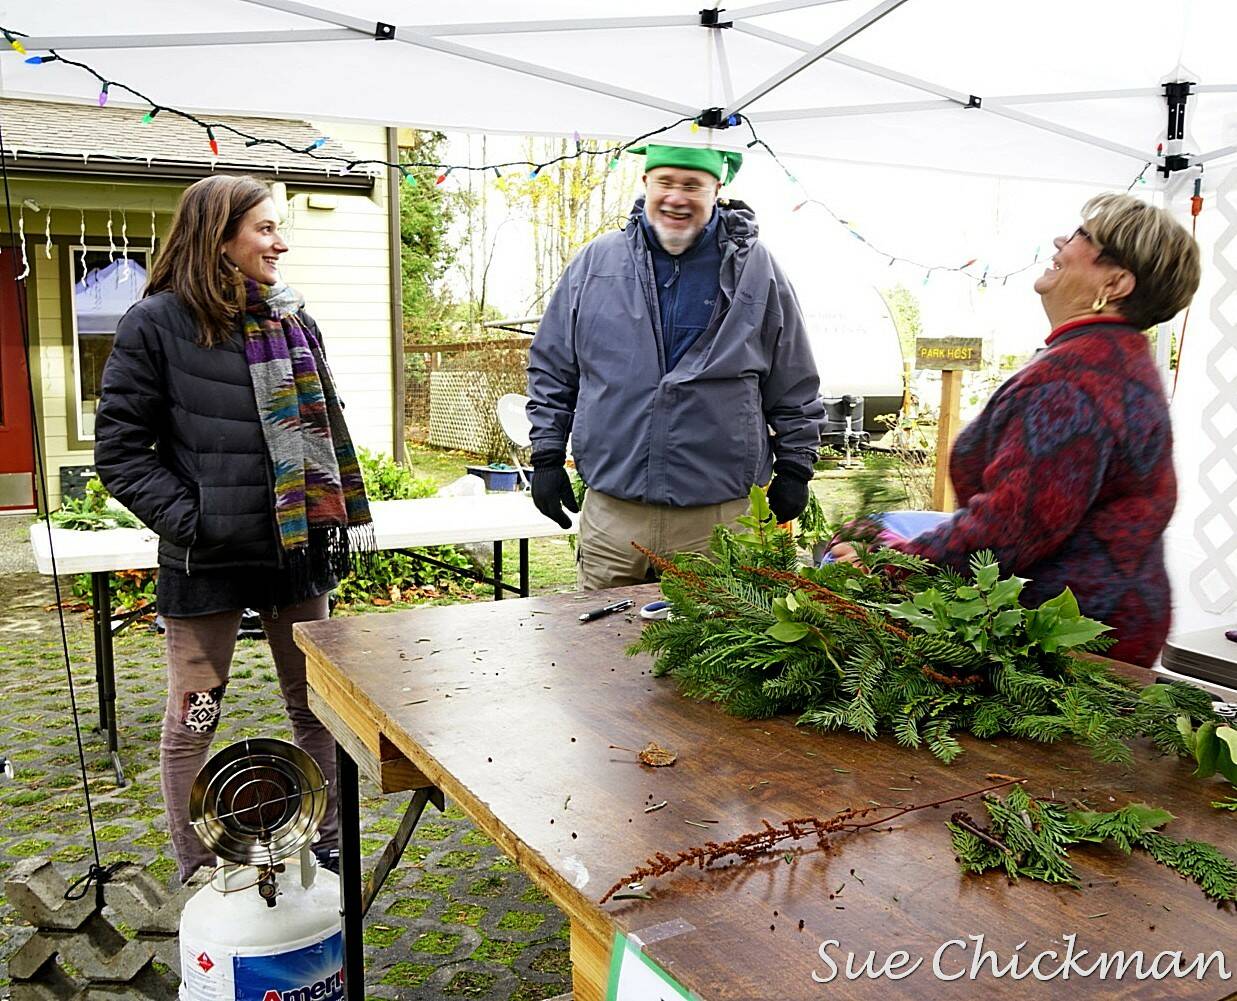 Tuttie Peetz, right, brings her wreath-making equipment and piles of greens, cones and ribbons to the River Center Holiday Nature Mart this weekend. The sale of handcrafted items, holiday wreaths and arrangements, baked goods and candy, is set for Saturday and Sunday to support the Dungeness River Nature Center’s education programs. (Submitted photo)